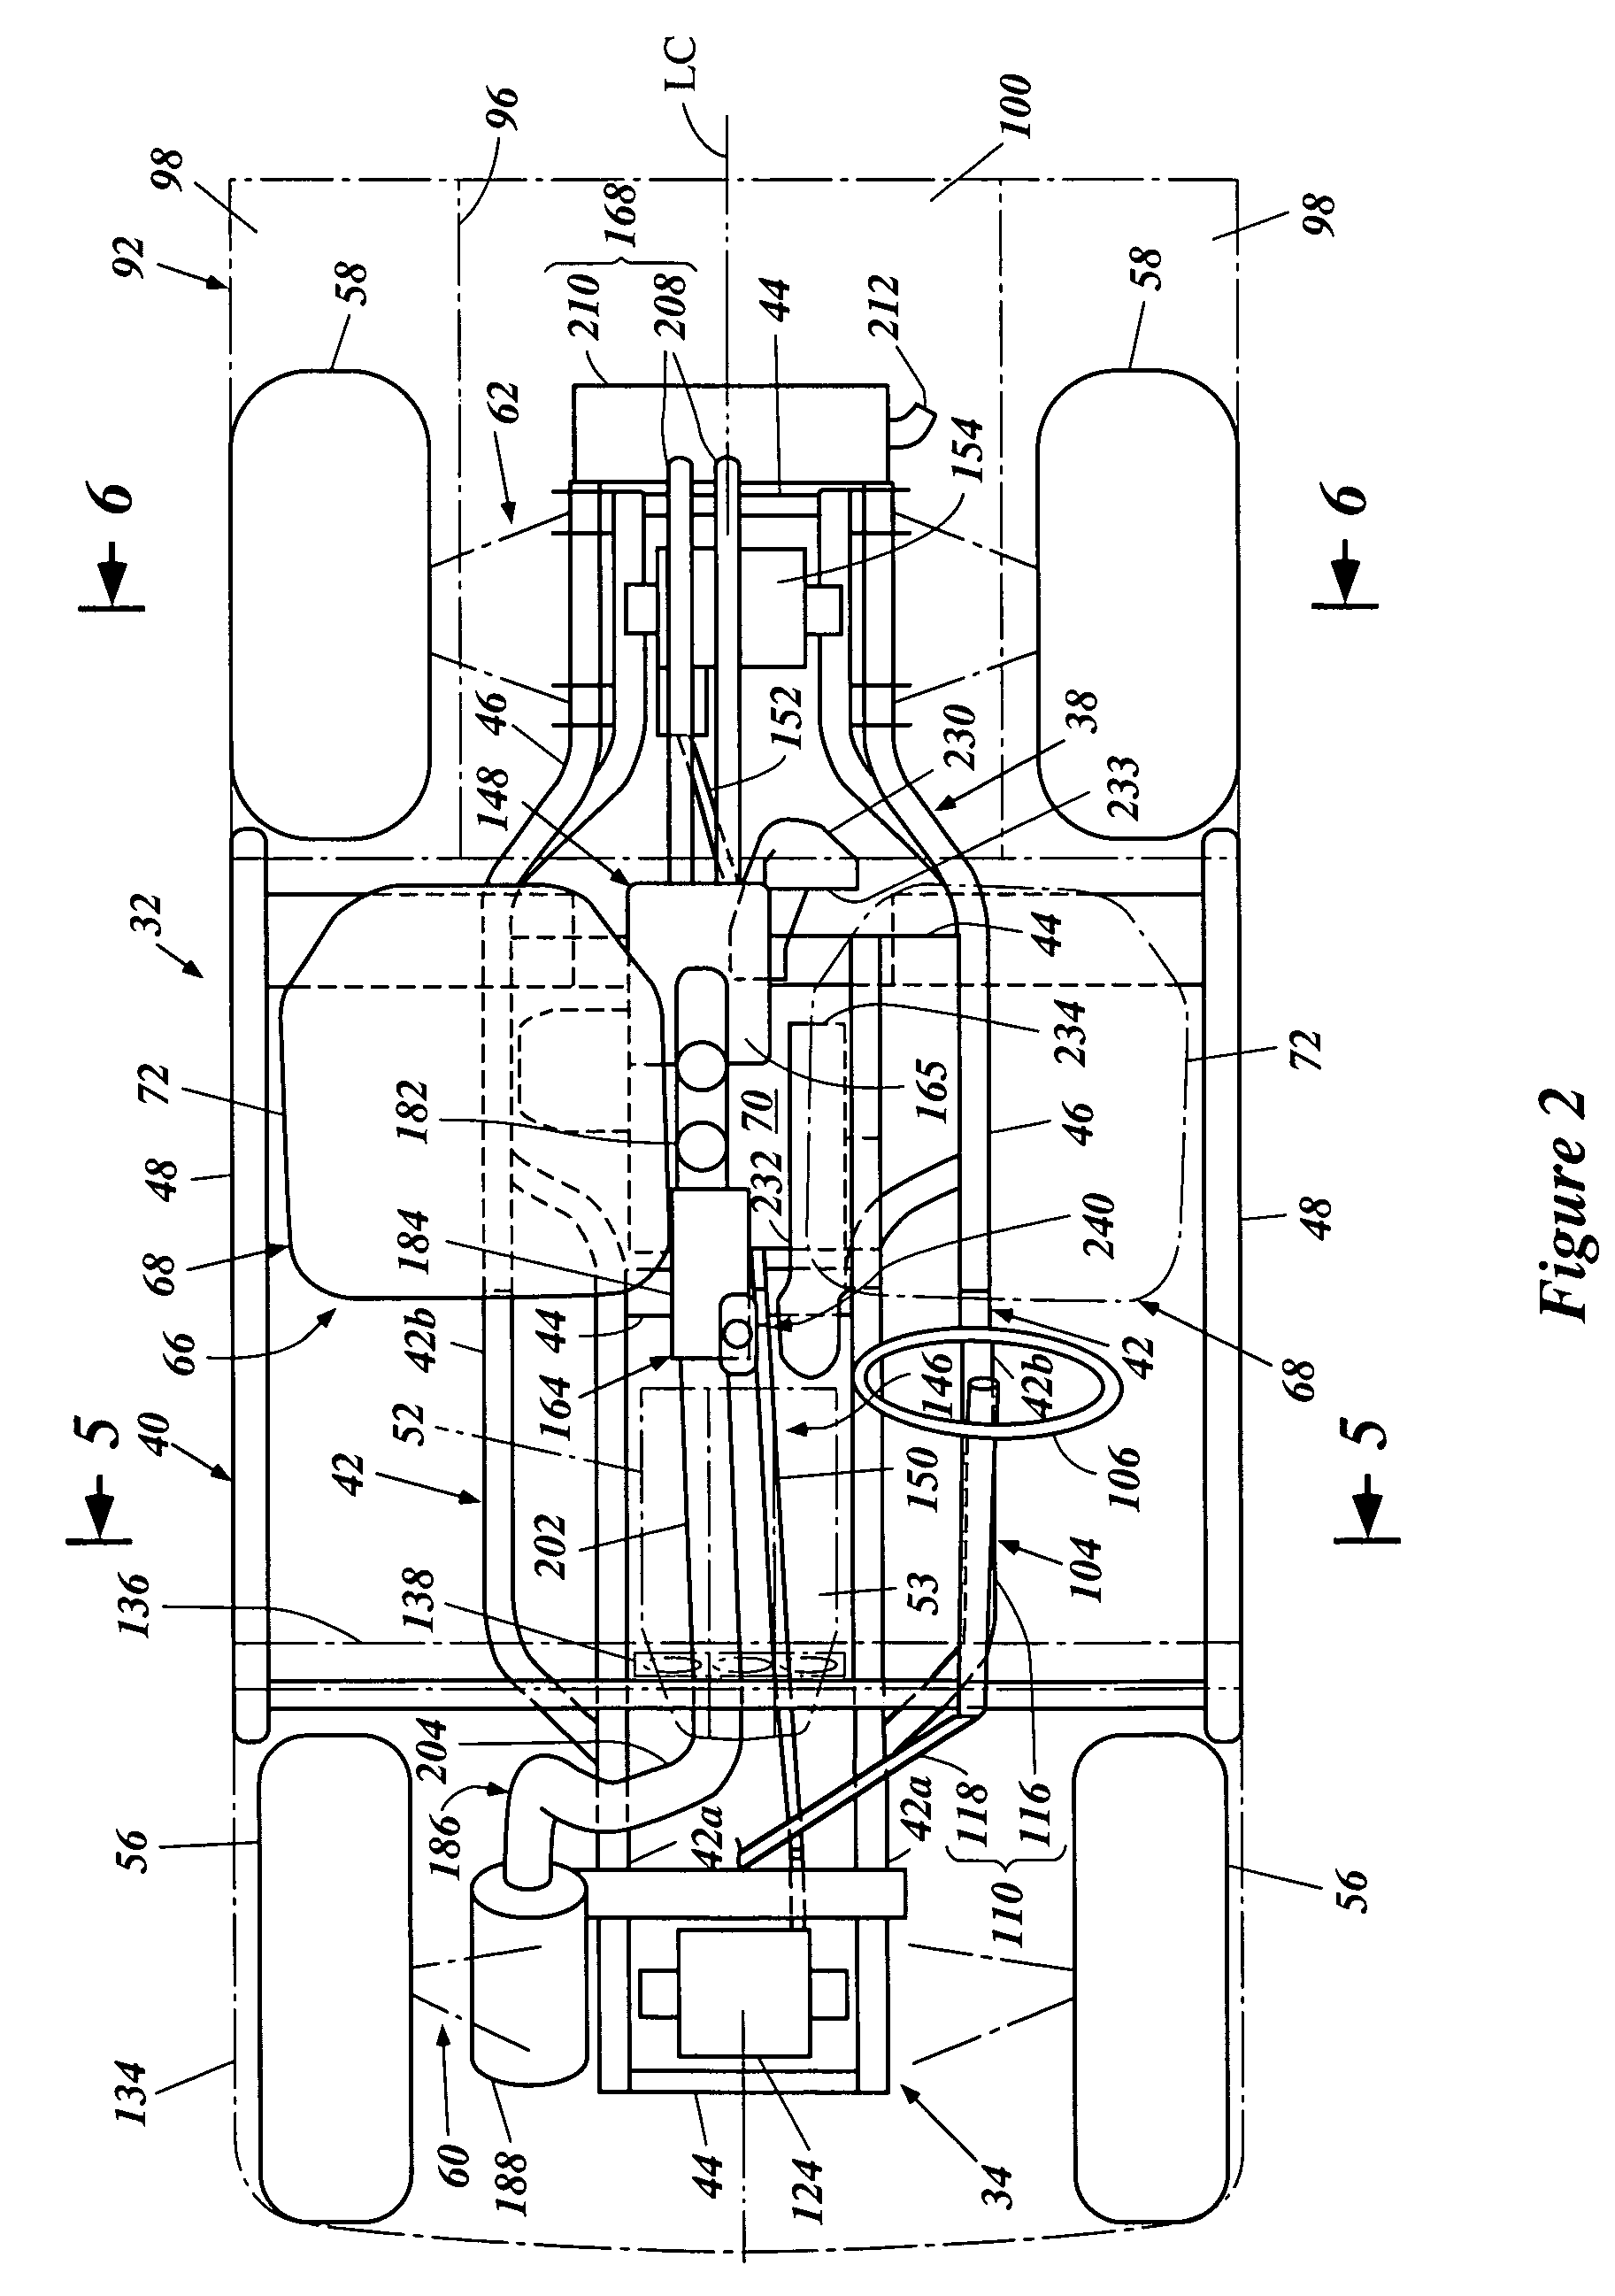 Steering system for off-road vehicle